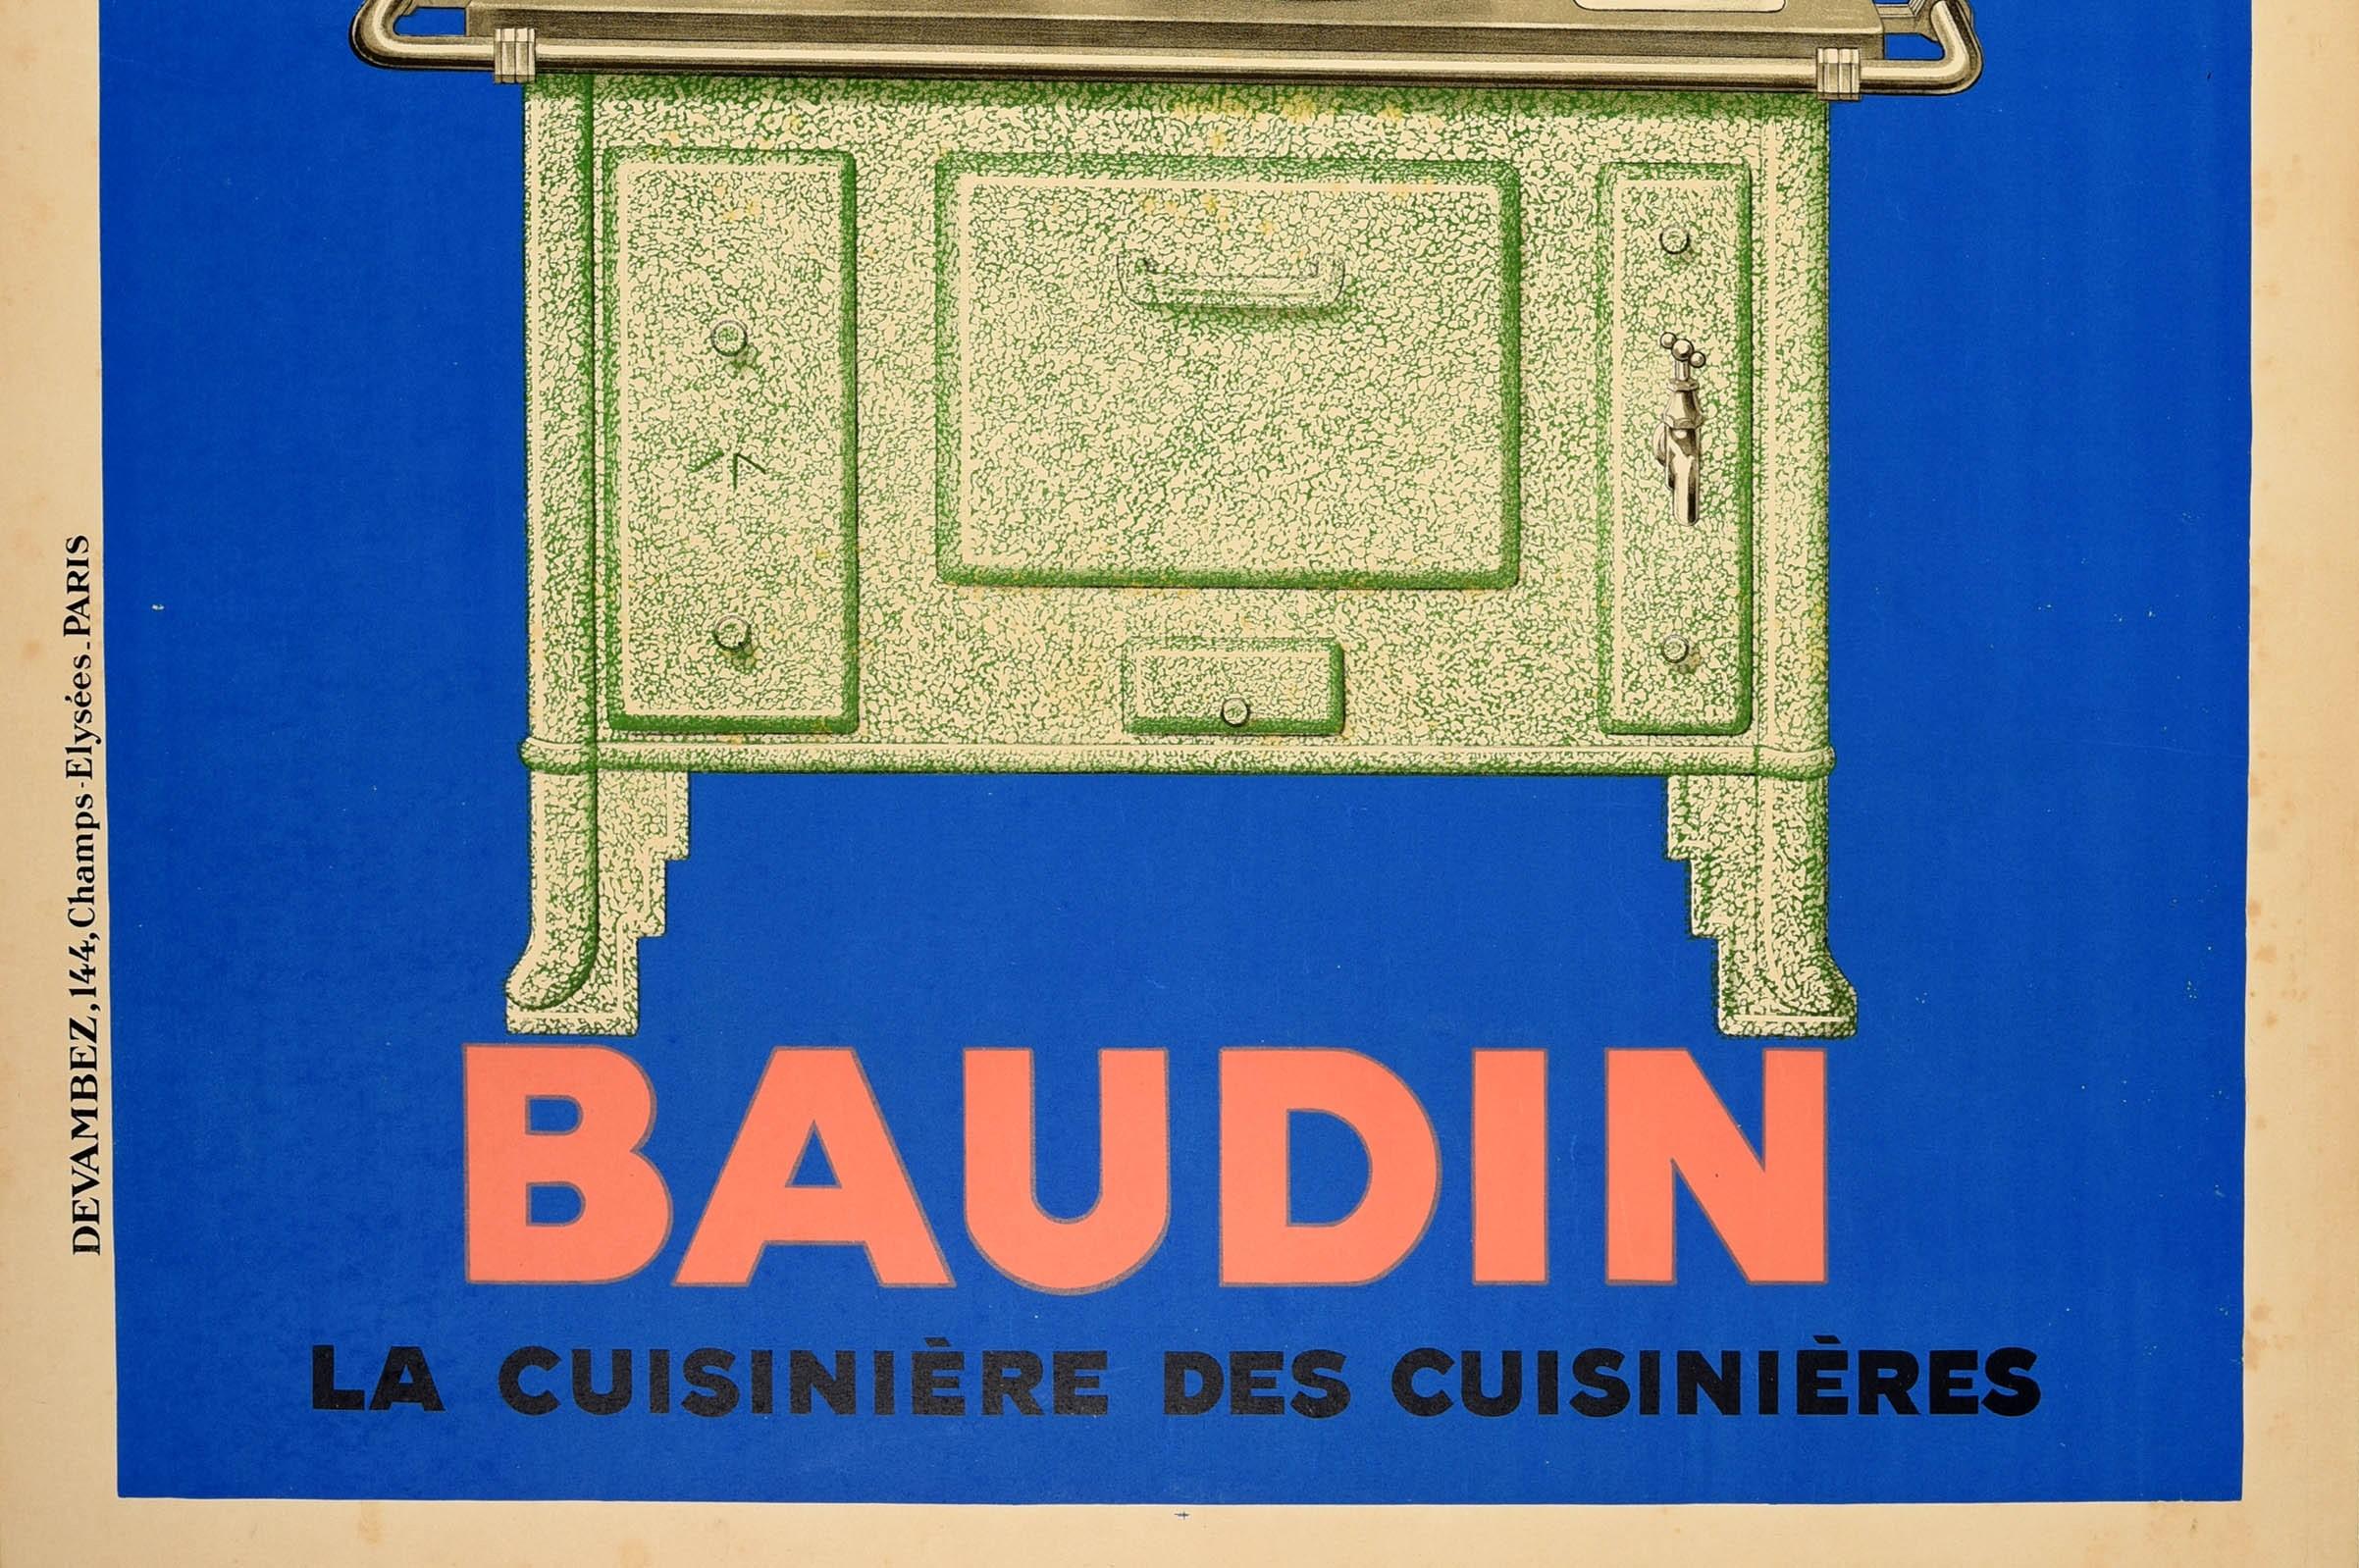 French Original Vintage Advertising Poster Baudin Cuisiniere Cooking Leonetto Cappiello For Sale